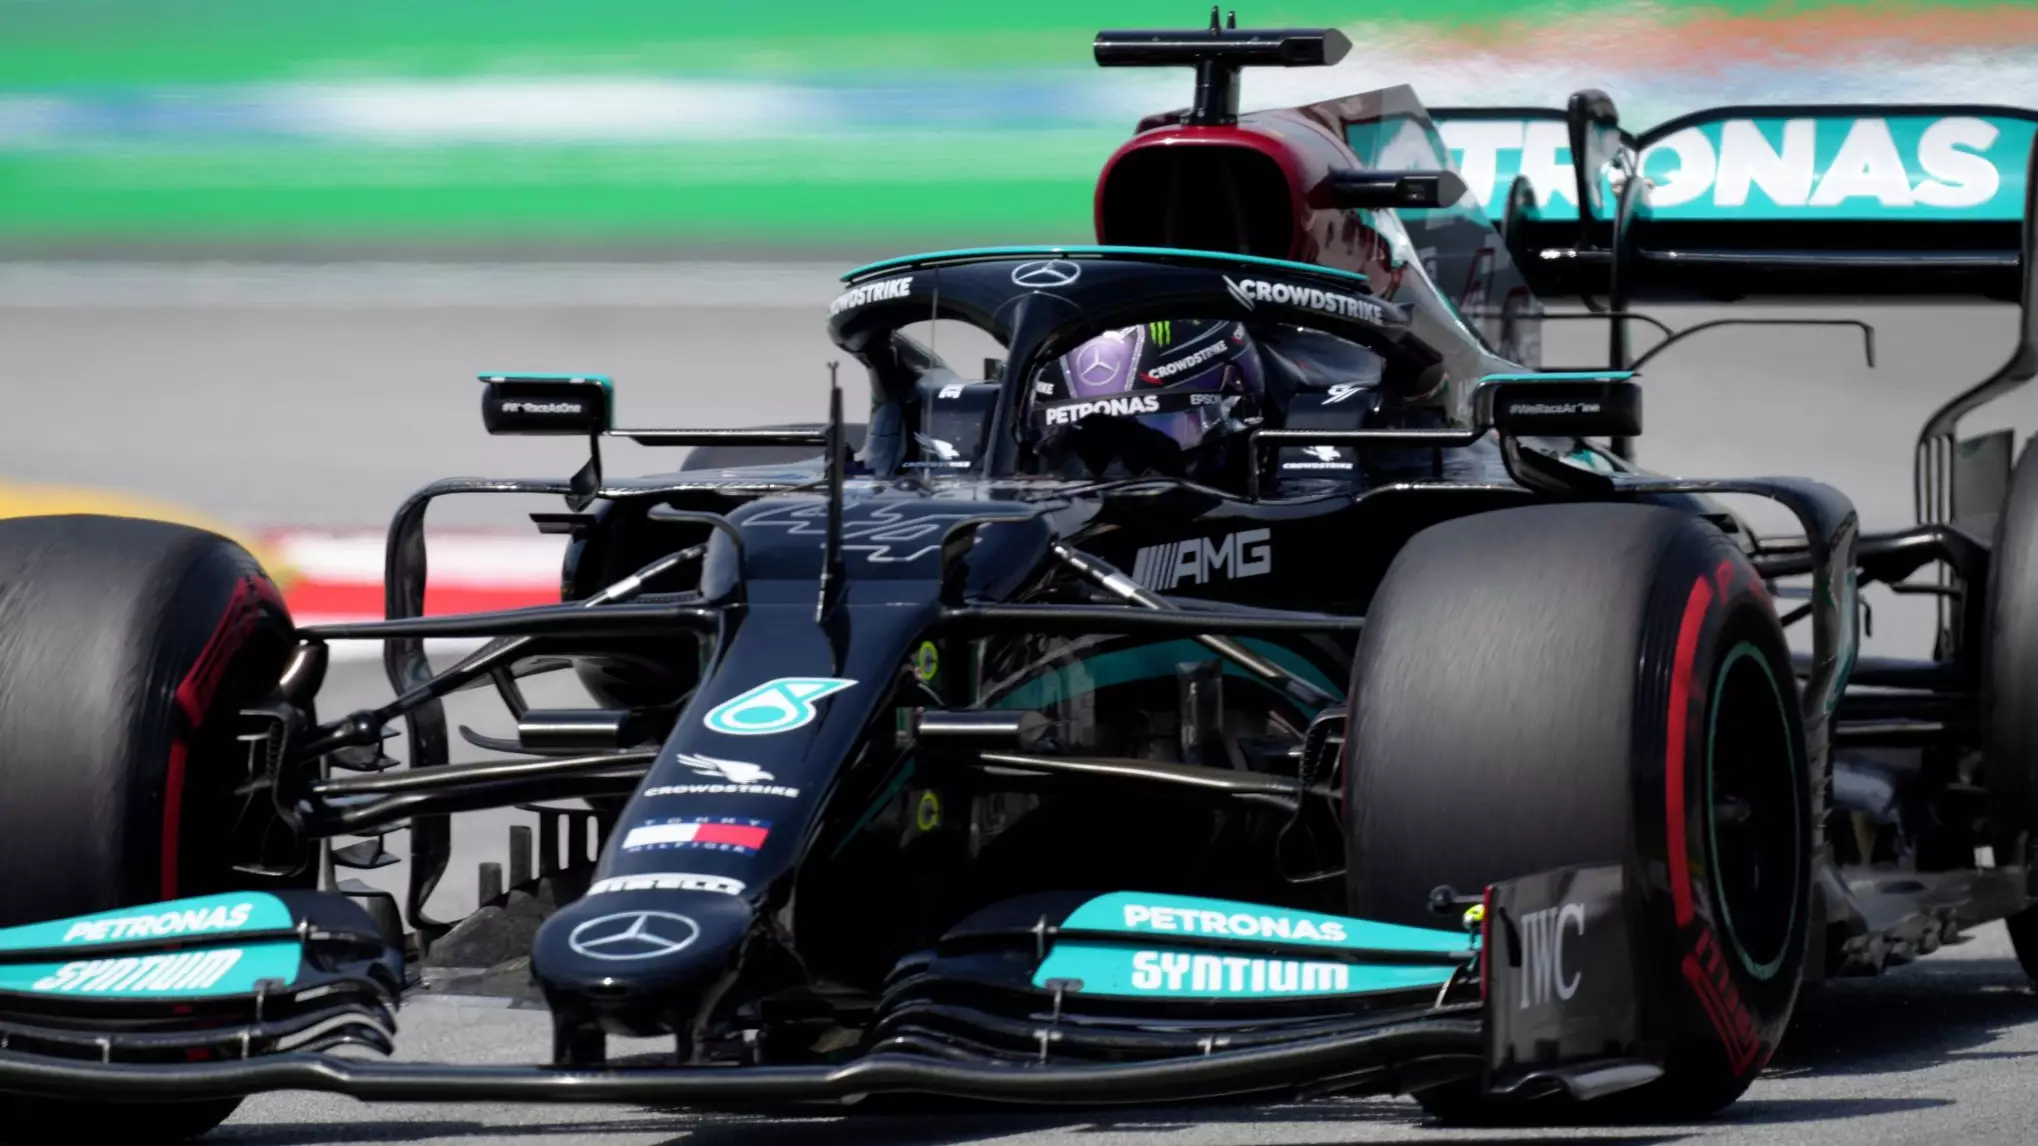 Spanish Grand Prix 2021 Start Time, Schedule And TV Channel Information